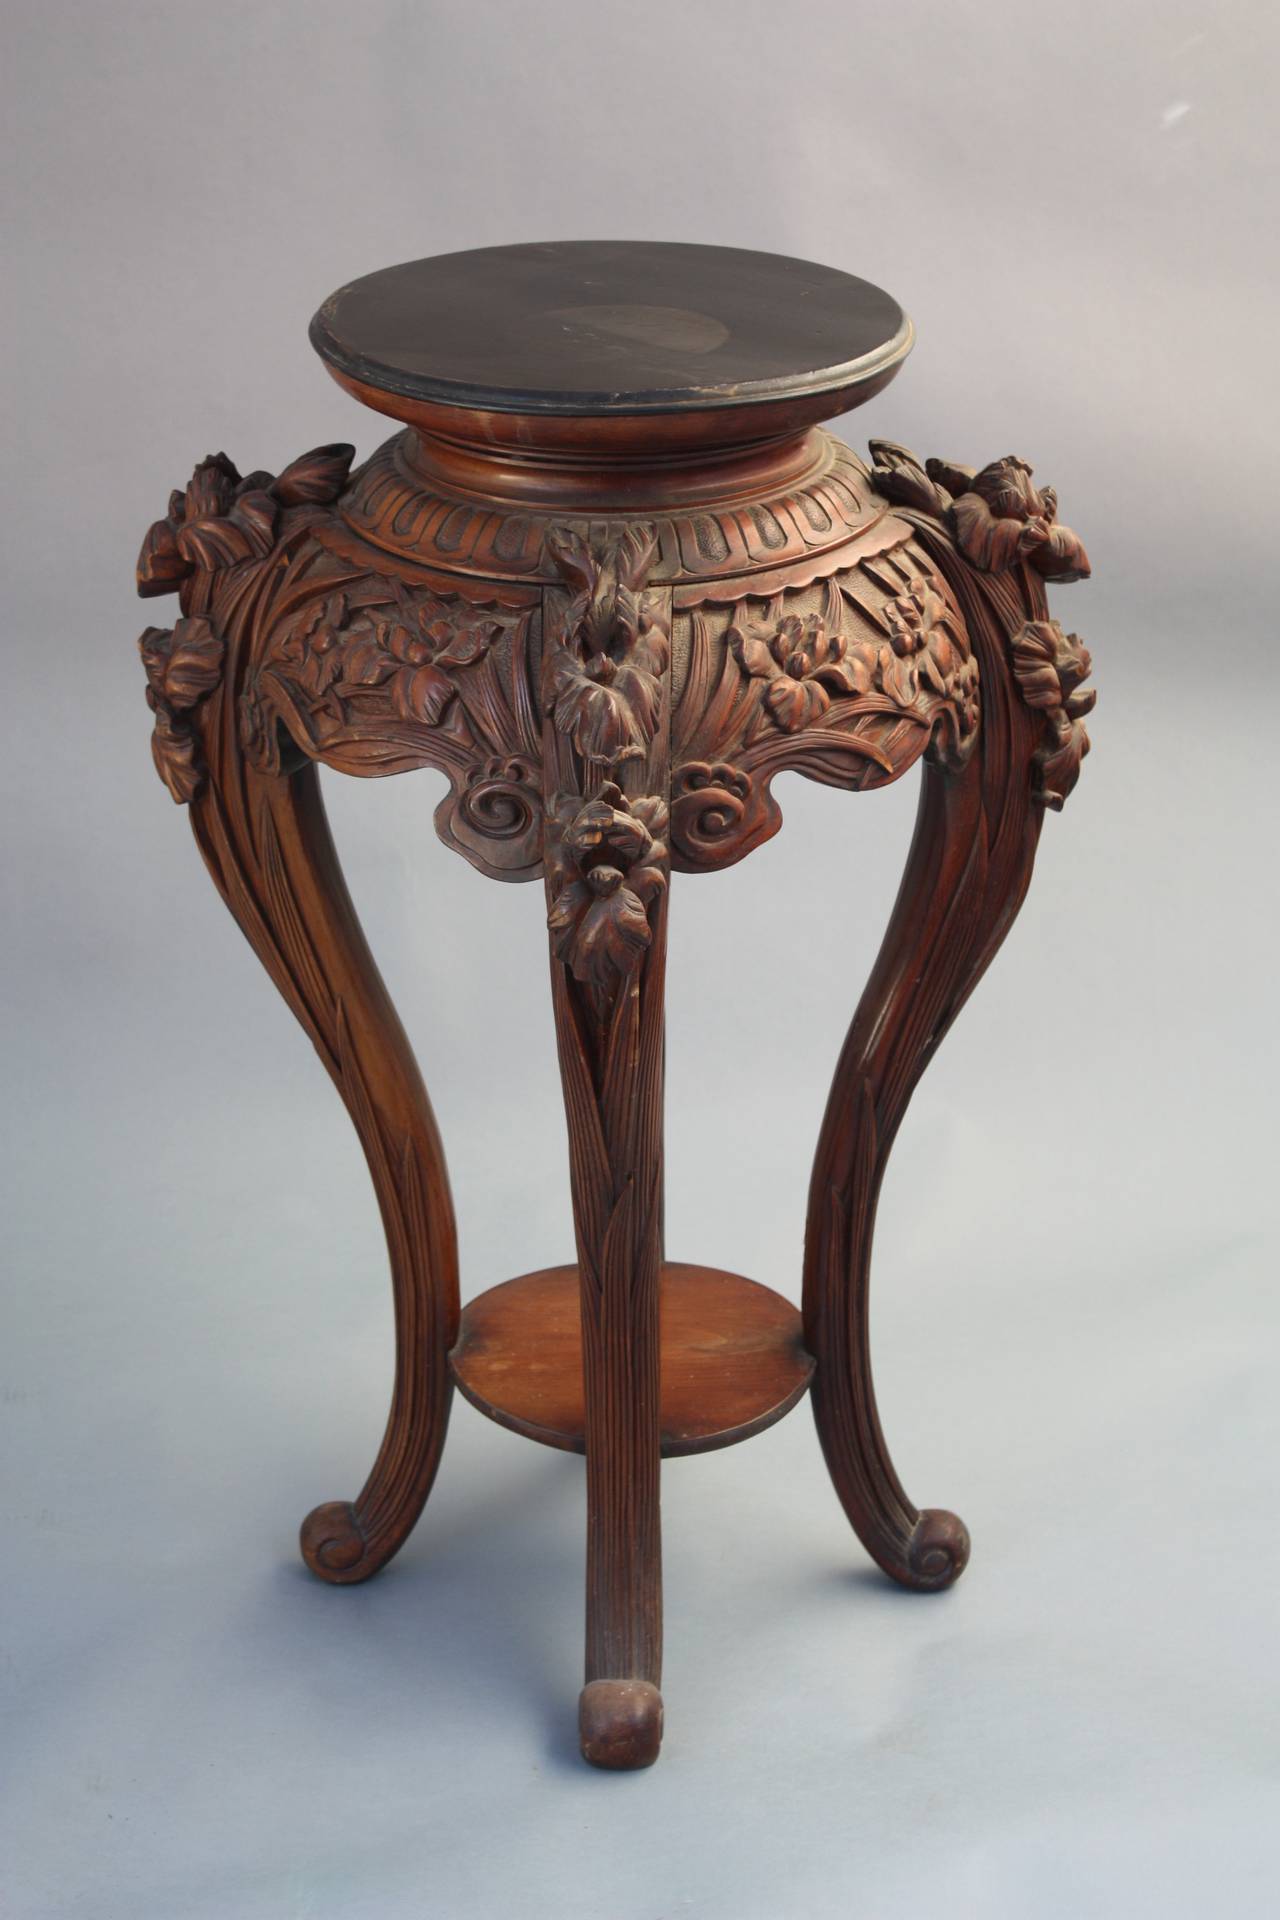 Ornately carved Chinese fern stand. Measures 35 1/4